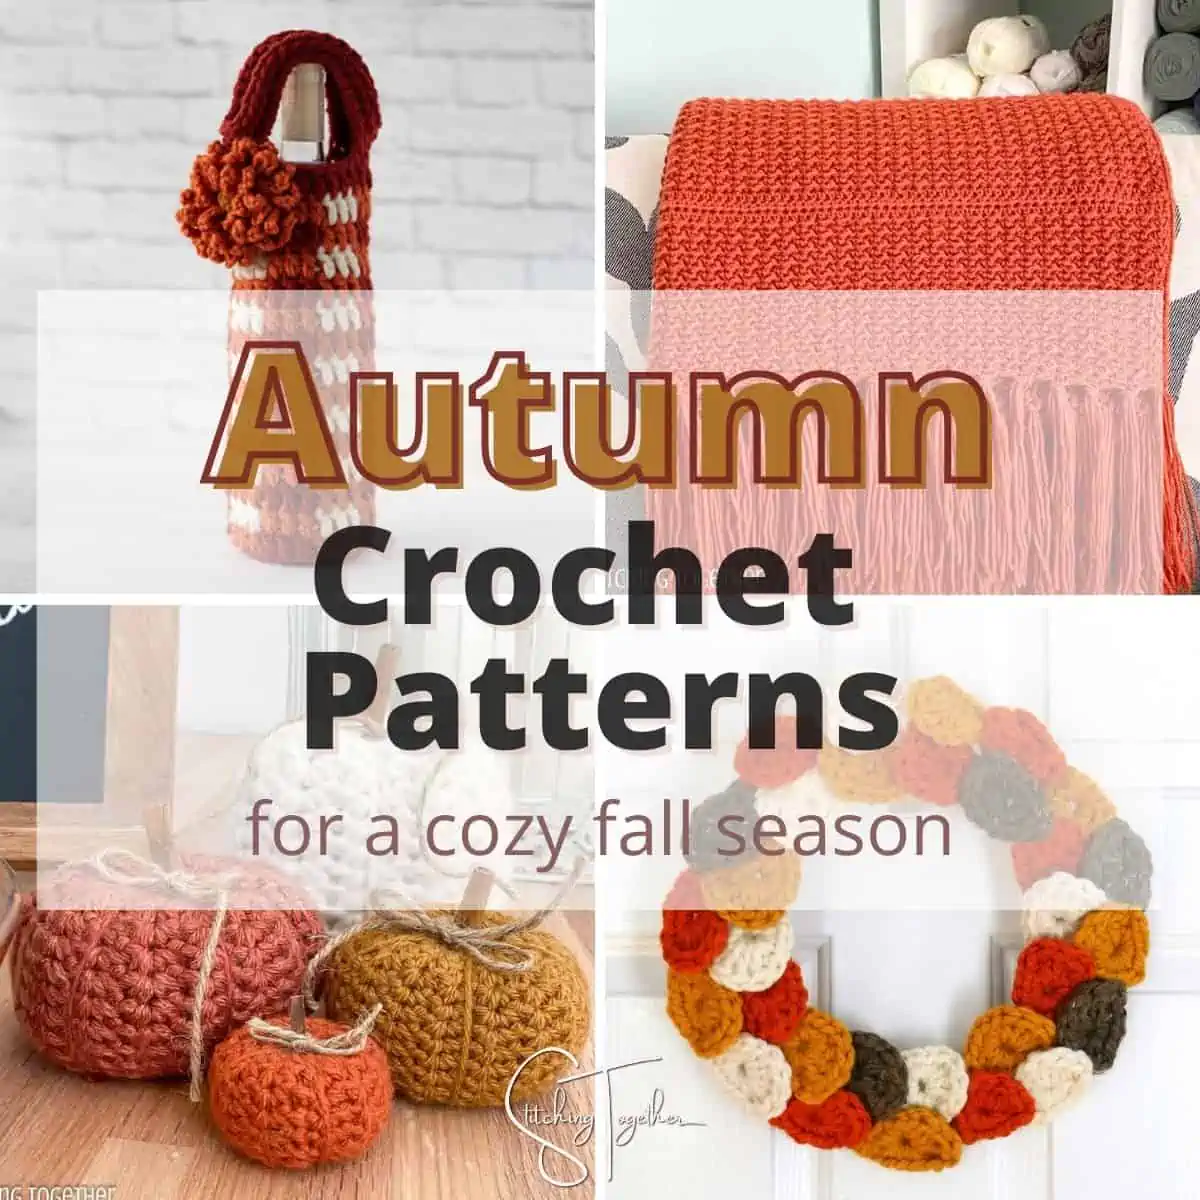 Fall Crochet Patterns: 20 Cozy Fall Crochet Projects For You And Your Home:  (Crochet Pattern Books, Afghan Crochet Patterns, Crocheted Patterns)